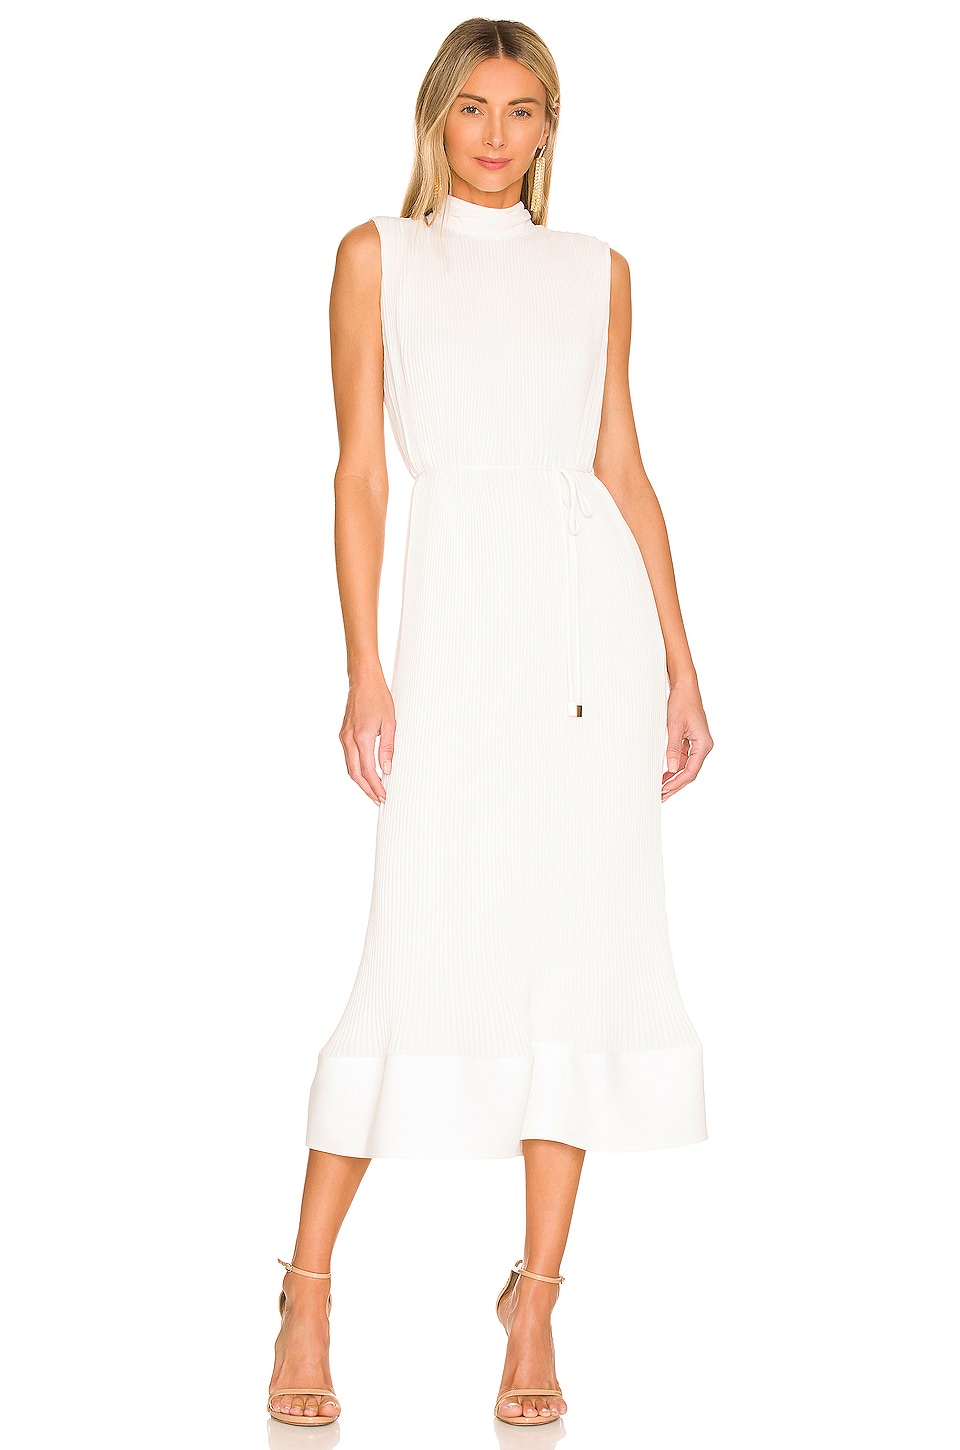 MILLY Melina Solid Pleat Dress in White | REVOLVE